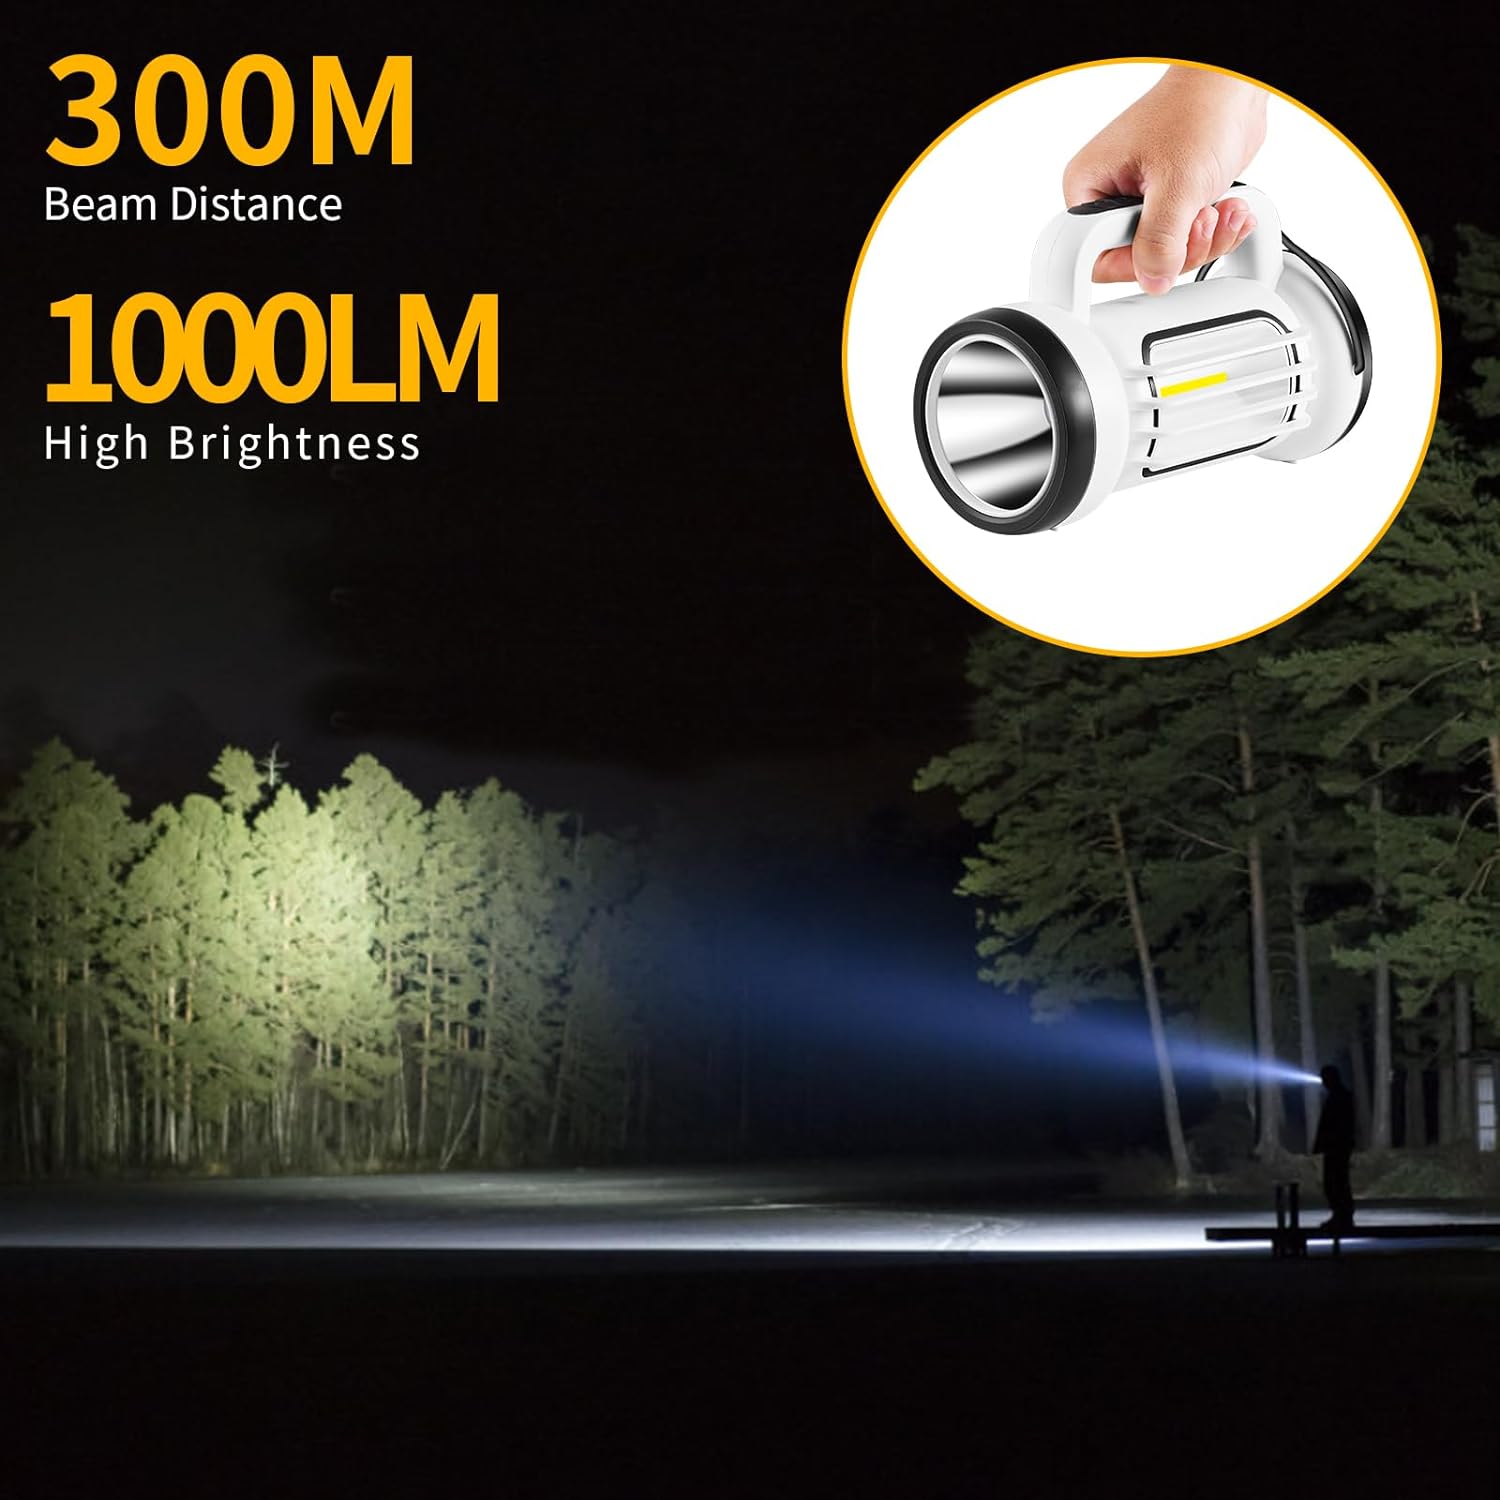 Rechargeable Flashlight, Ultra Bright 1000 Lumen LED Flashlight with 5 Lighting Modes, IPX6 Waterproof, for Camping, Hiking, Hunting and More